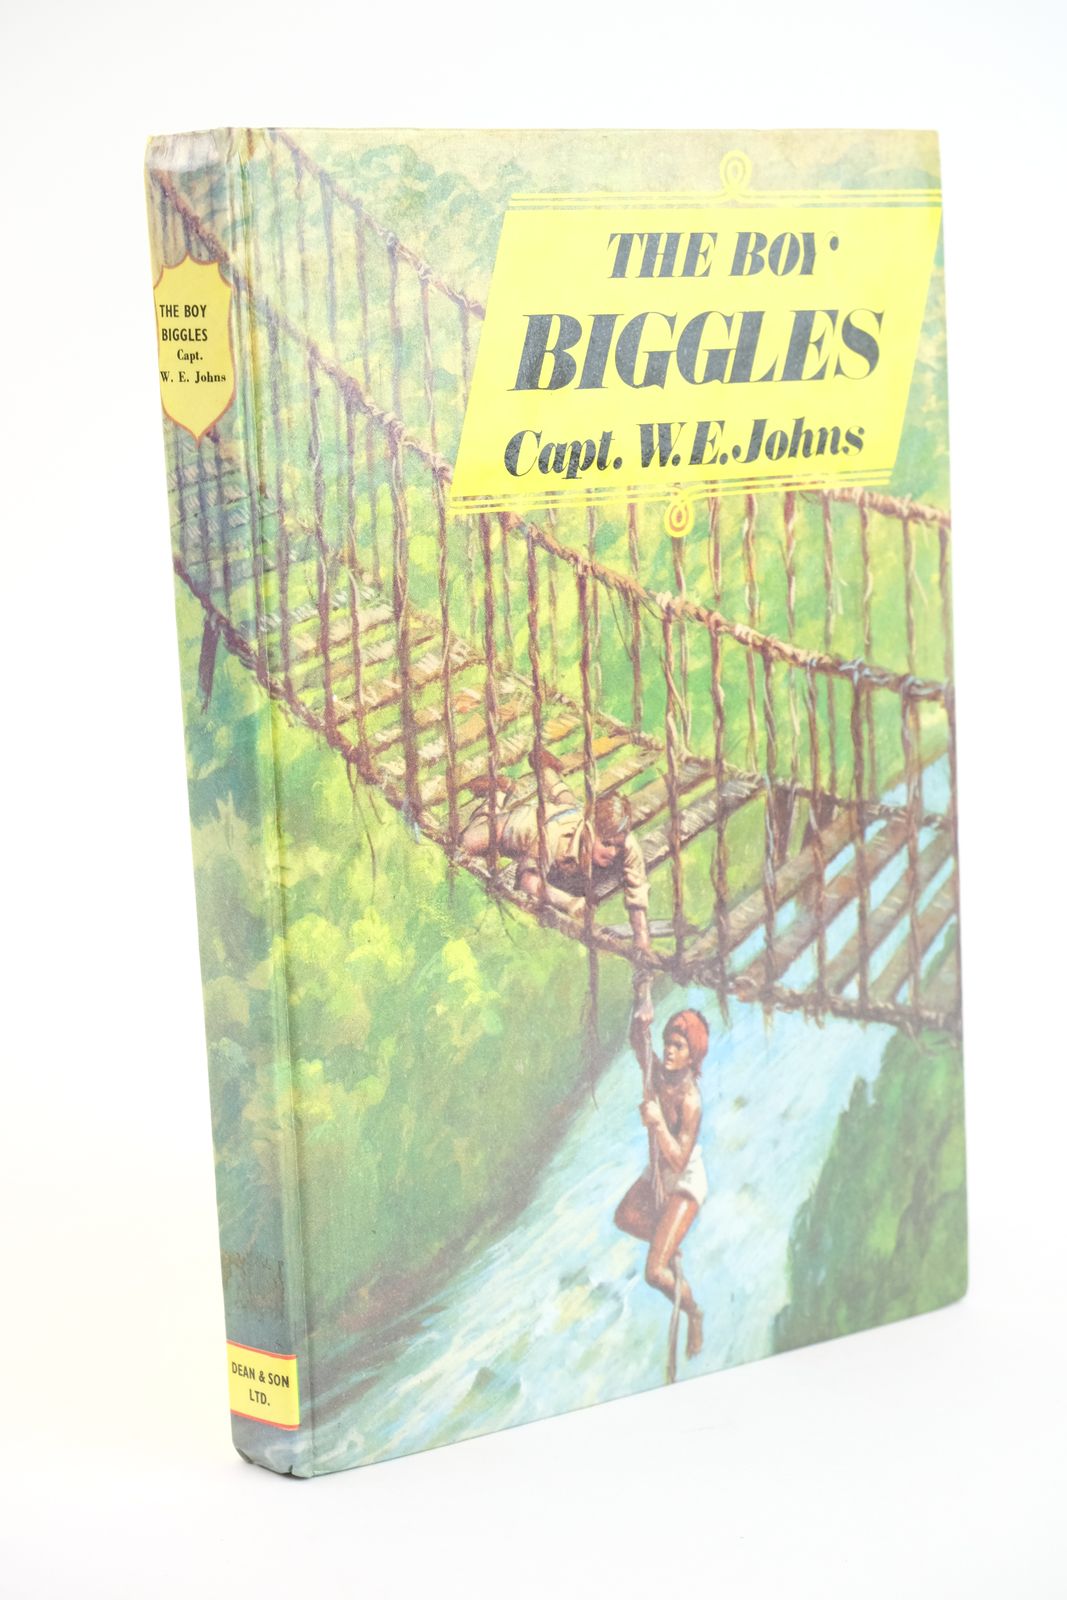 Photo of THE BOY BIGGLES written by Johns, W.E. published by Dean &amp; Son Ltd. (STOCK CODE: 1323890)  for sale by Stella & Rose's Books